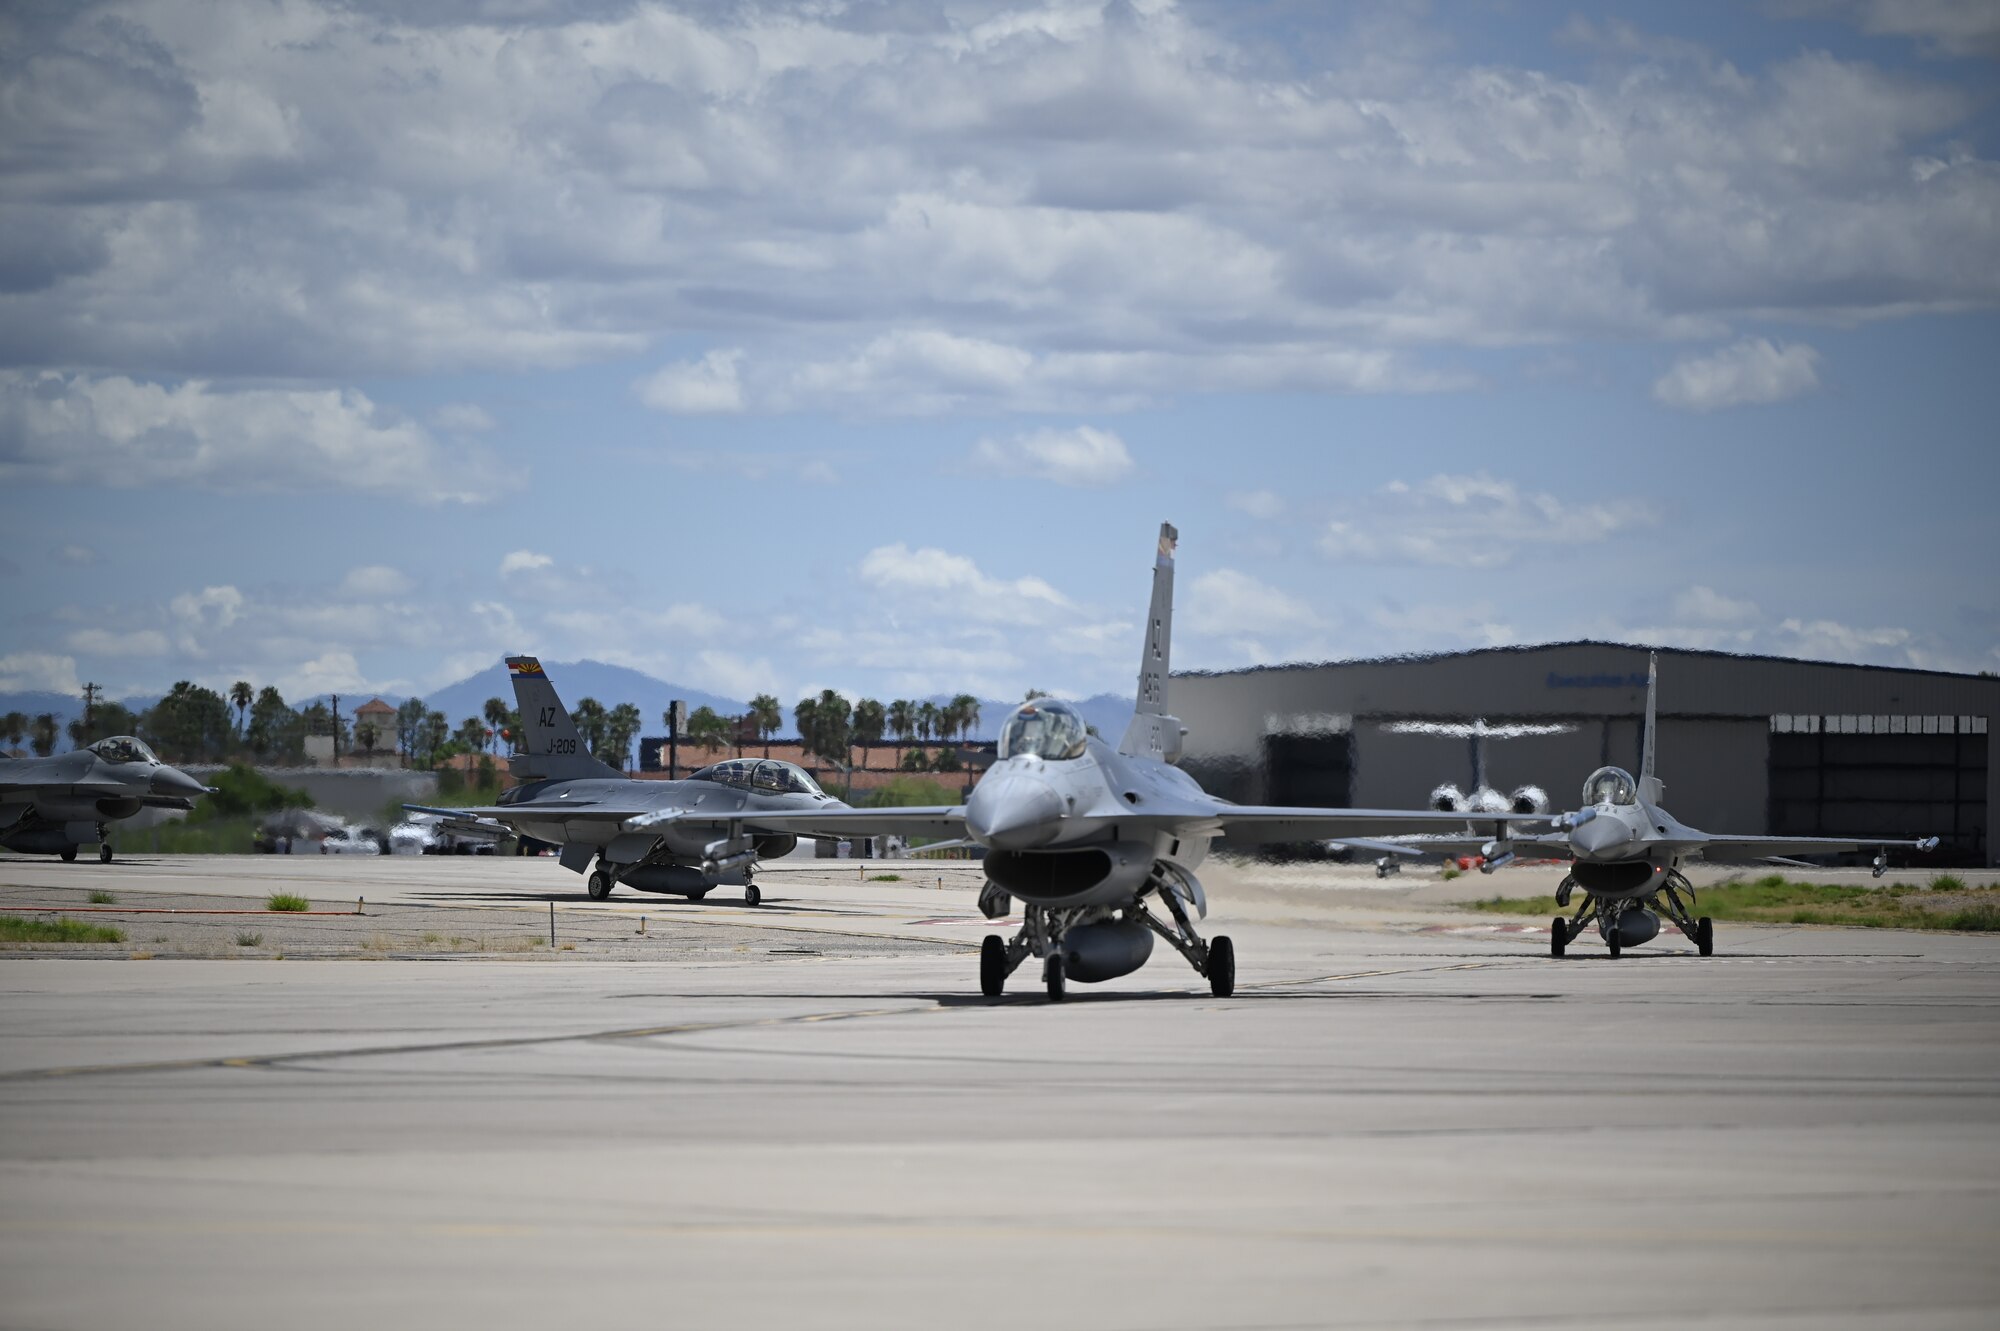 The last four F-16s belonging to the Royal Netherlands Air Force taxi after landing here today at the Morris Air National Guard Base in Tucson. The Dutch were the first in a long line of foreign partners to train at Morris ANG Base, flying an average of 2,000 hours per year in the F-16 and graduating four student pilots every nine months as part of the 148th Fighter Squadron. (U.S. Air National Guard photo by Maj. Angela Walz)